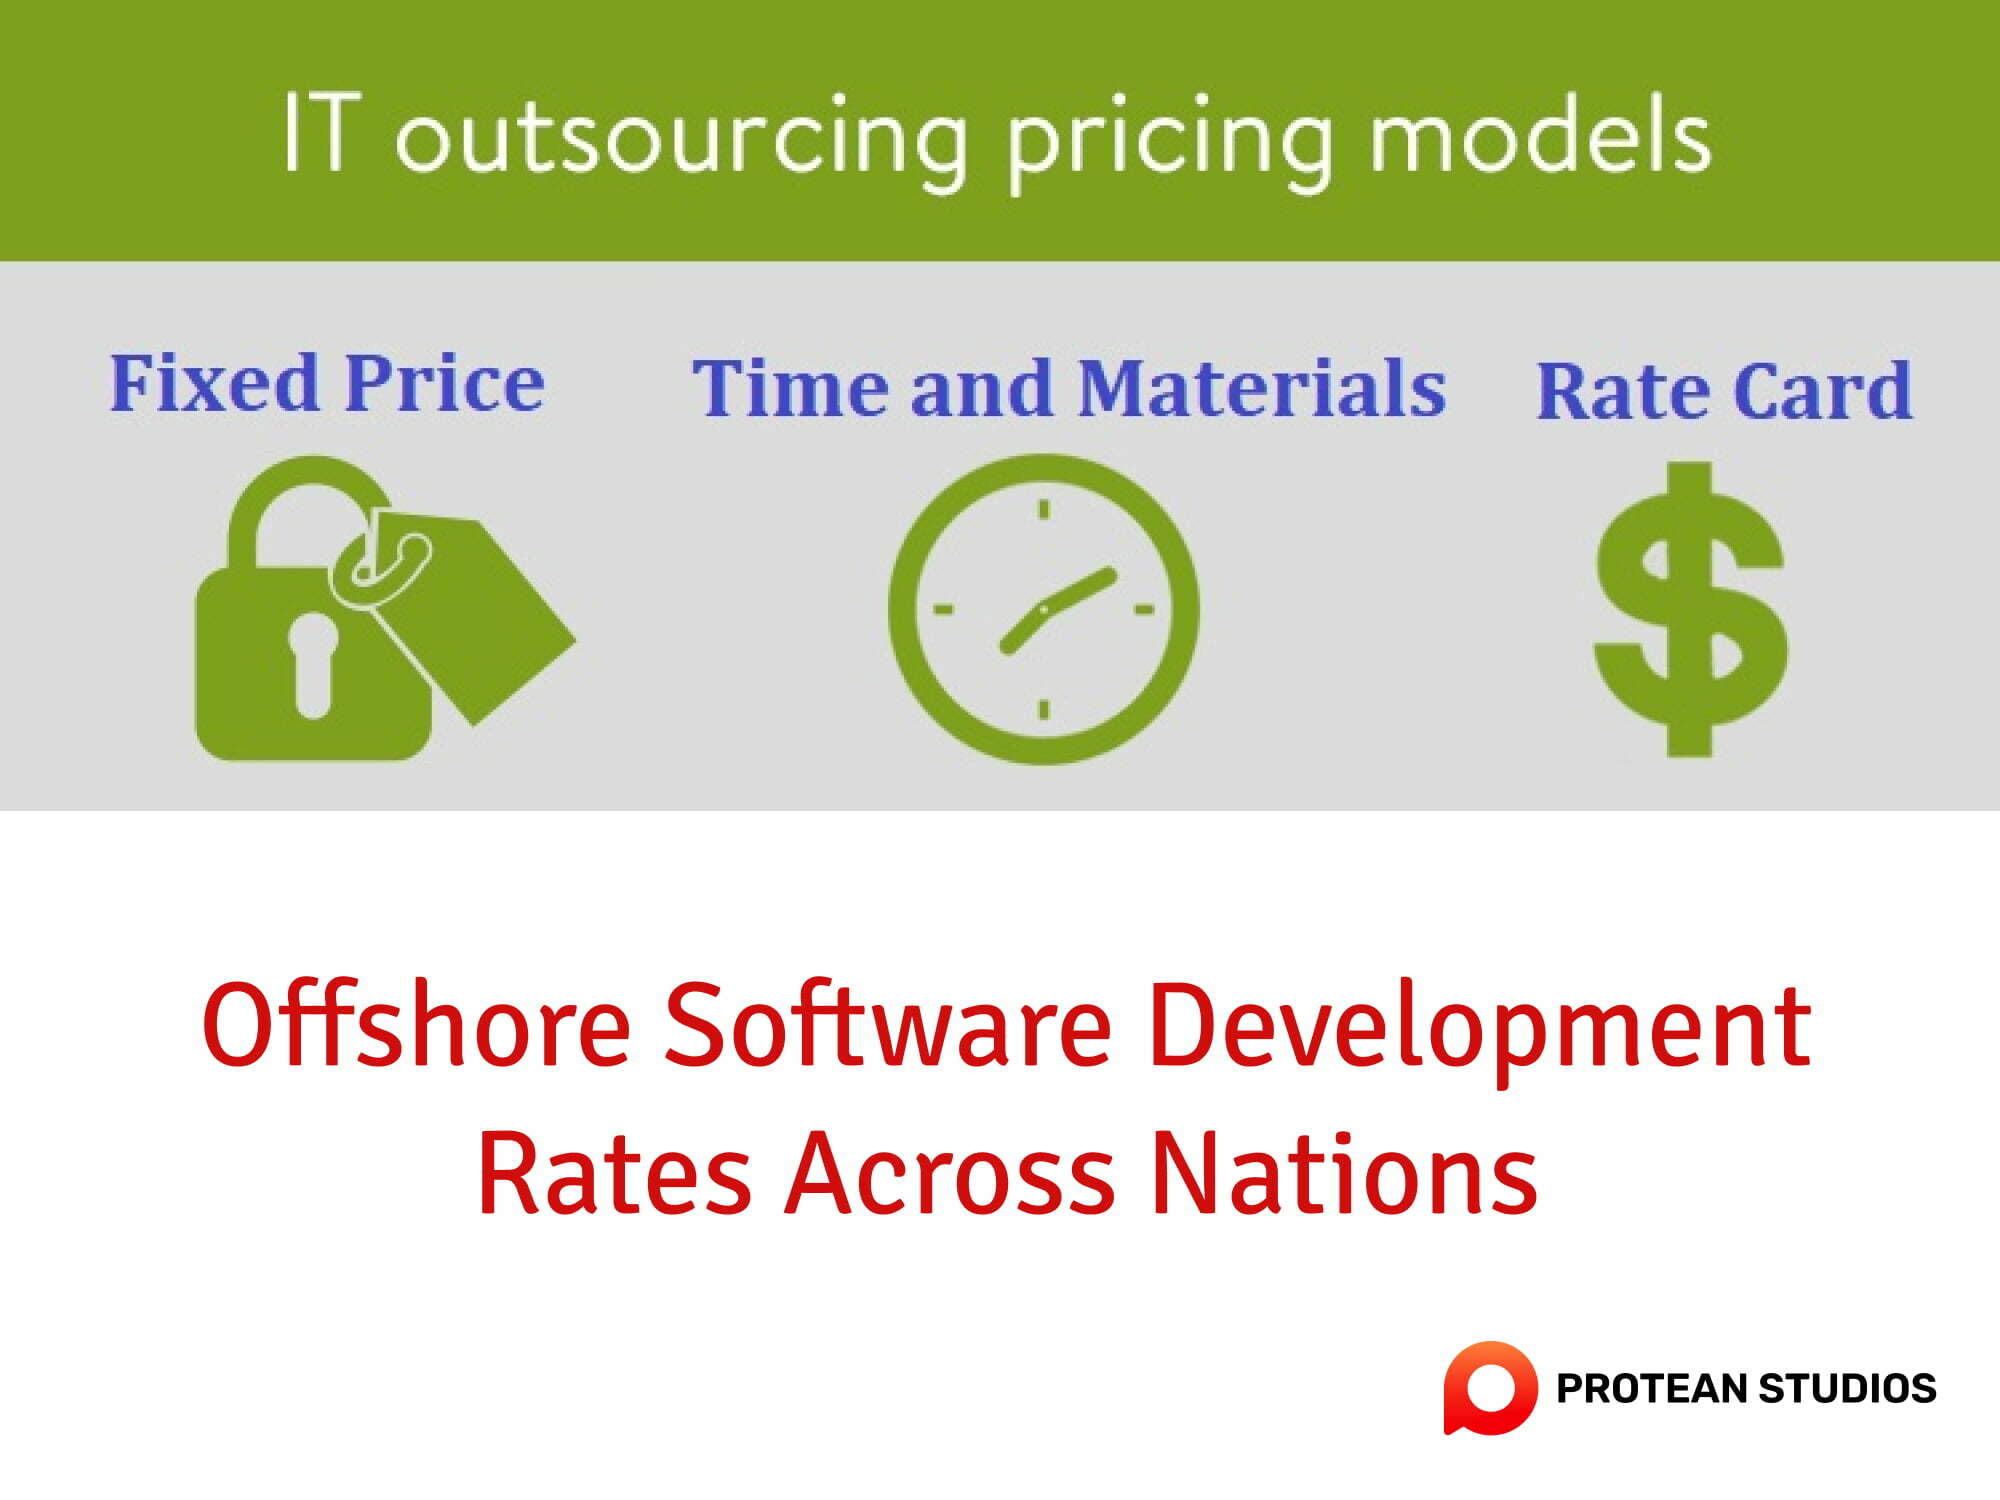 The common pricing models for IT outsourcing